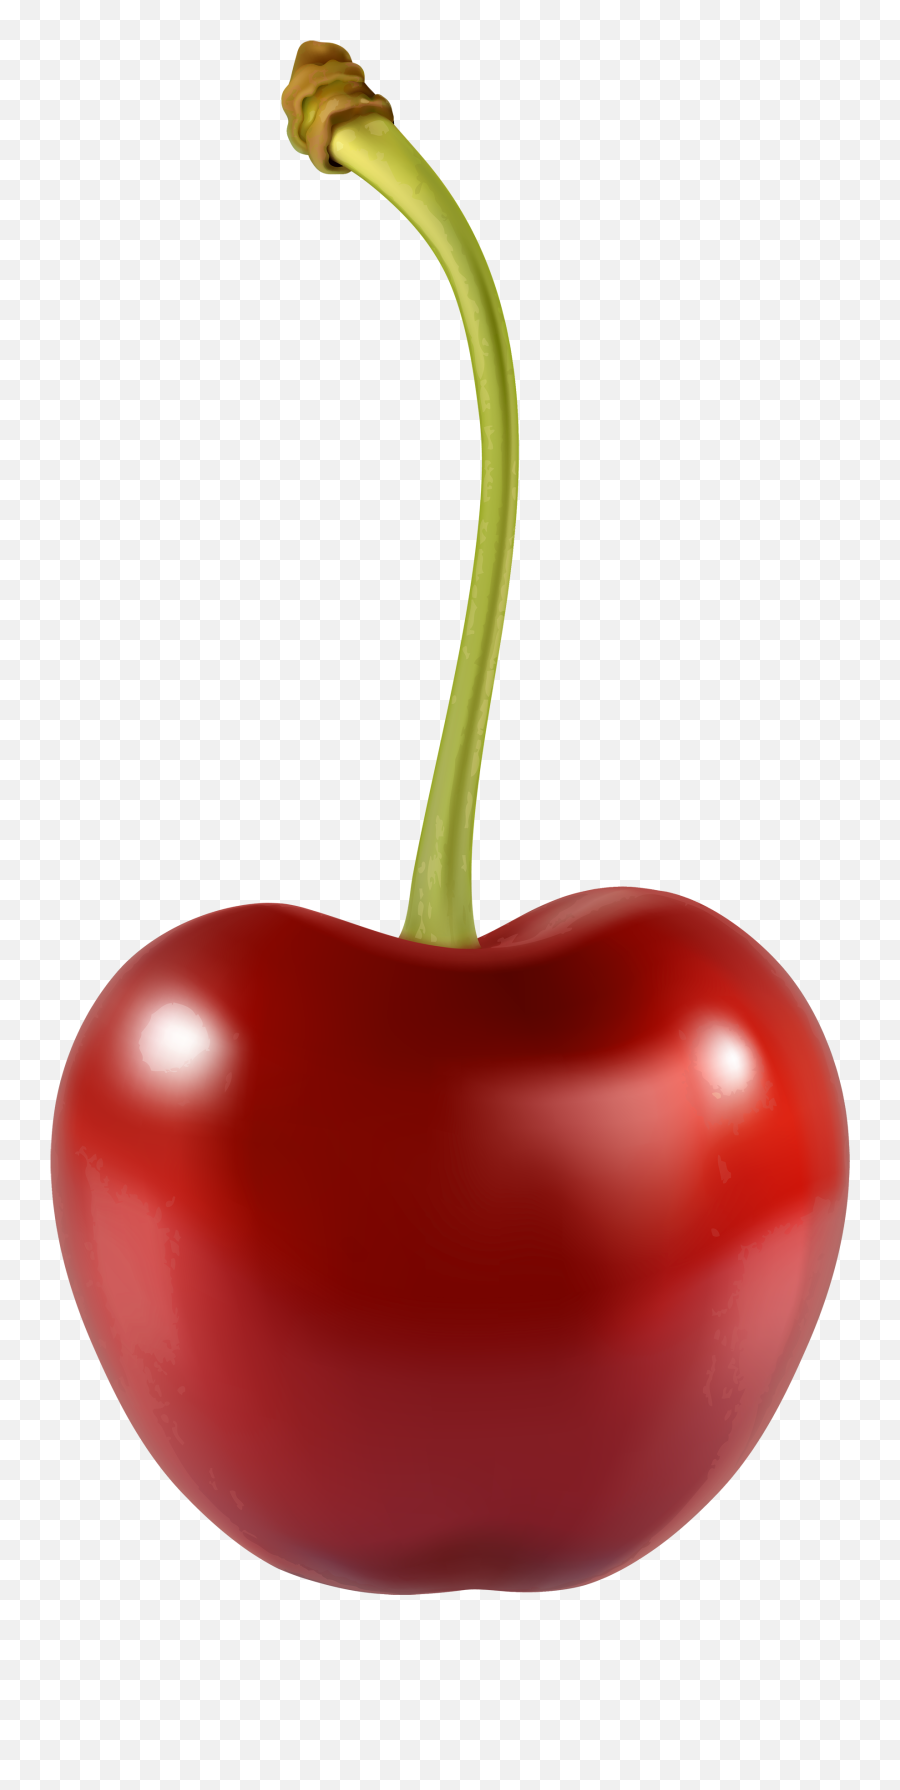 Cherry Transparent Png Clipart Free - 1 Cherry Clipart,Cherries Png